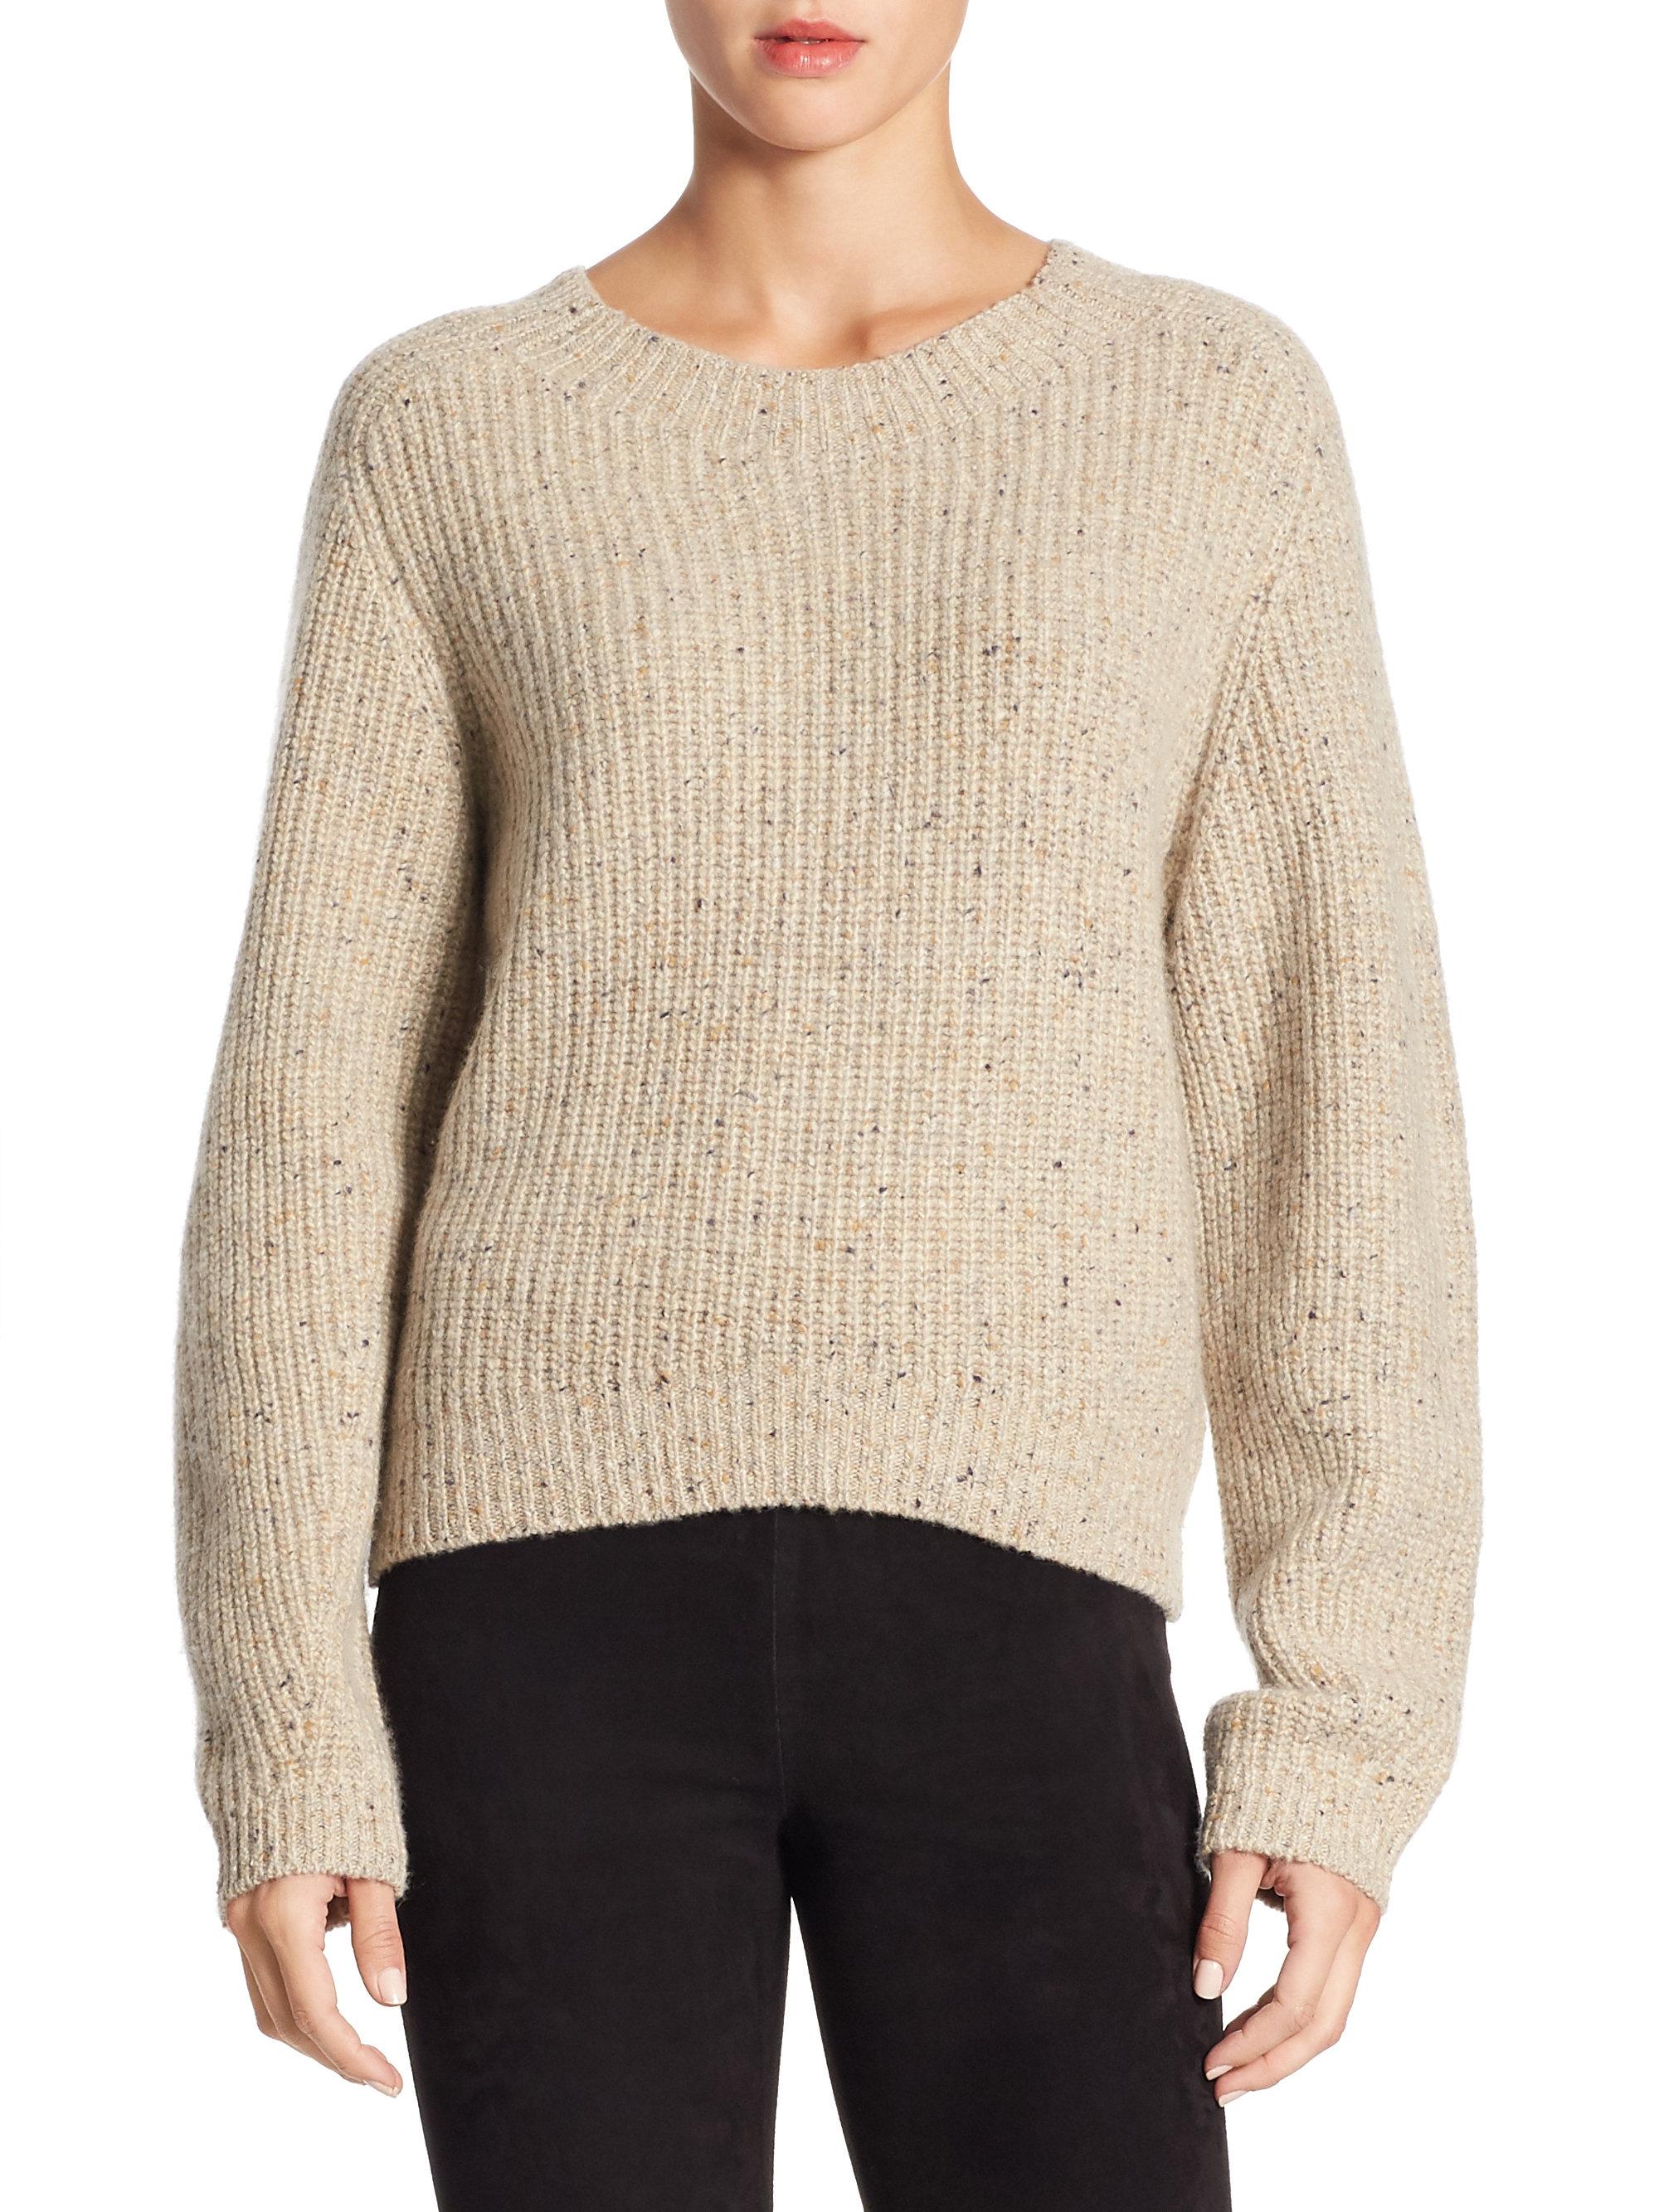 Lyst - Vince Saddle Cashmere Sweater in Natural